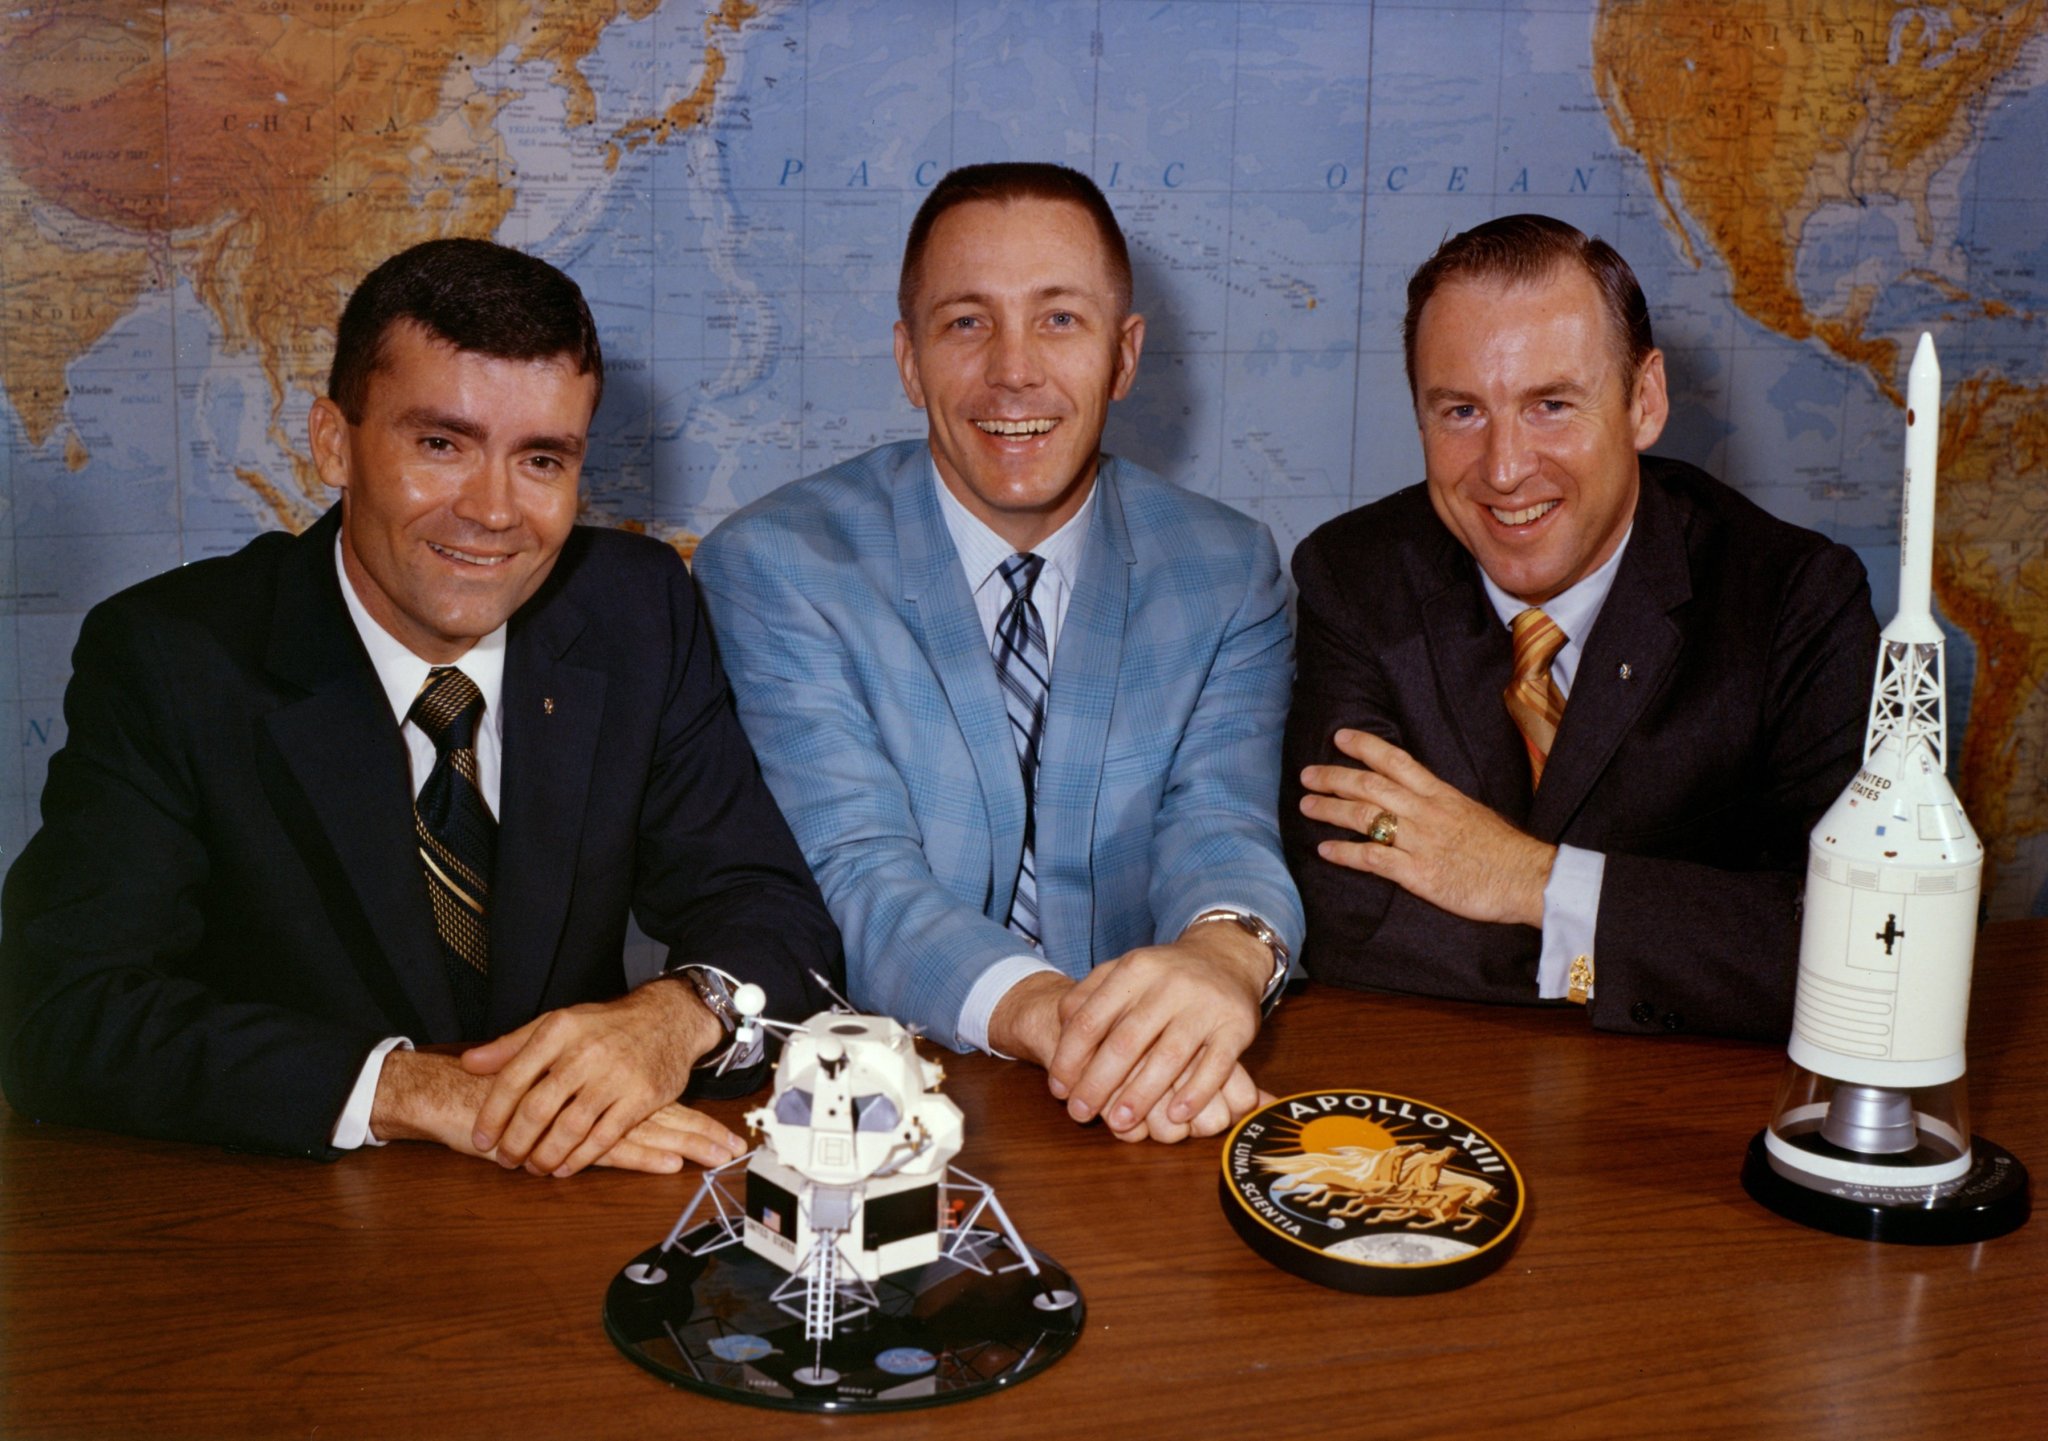 Three astronauts sit in suits at a table with the Apollo 13 patch and spacecraft replicas